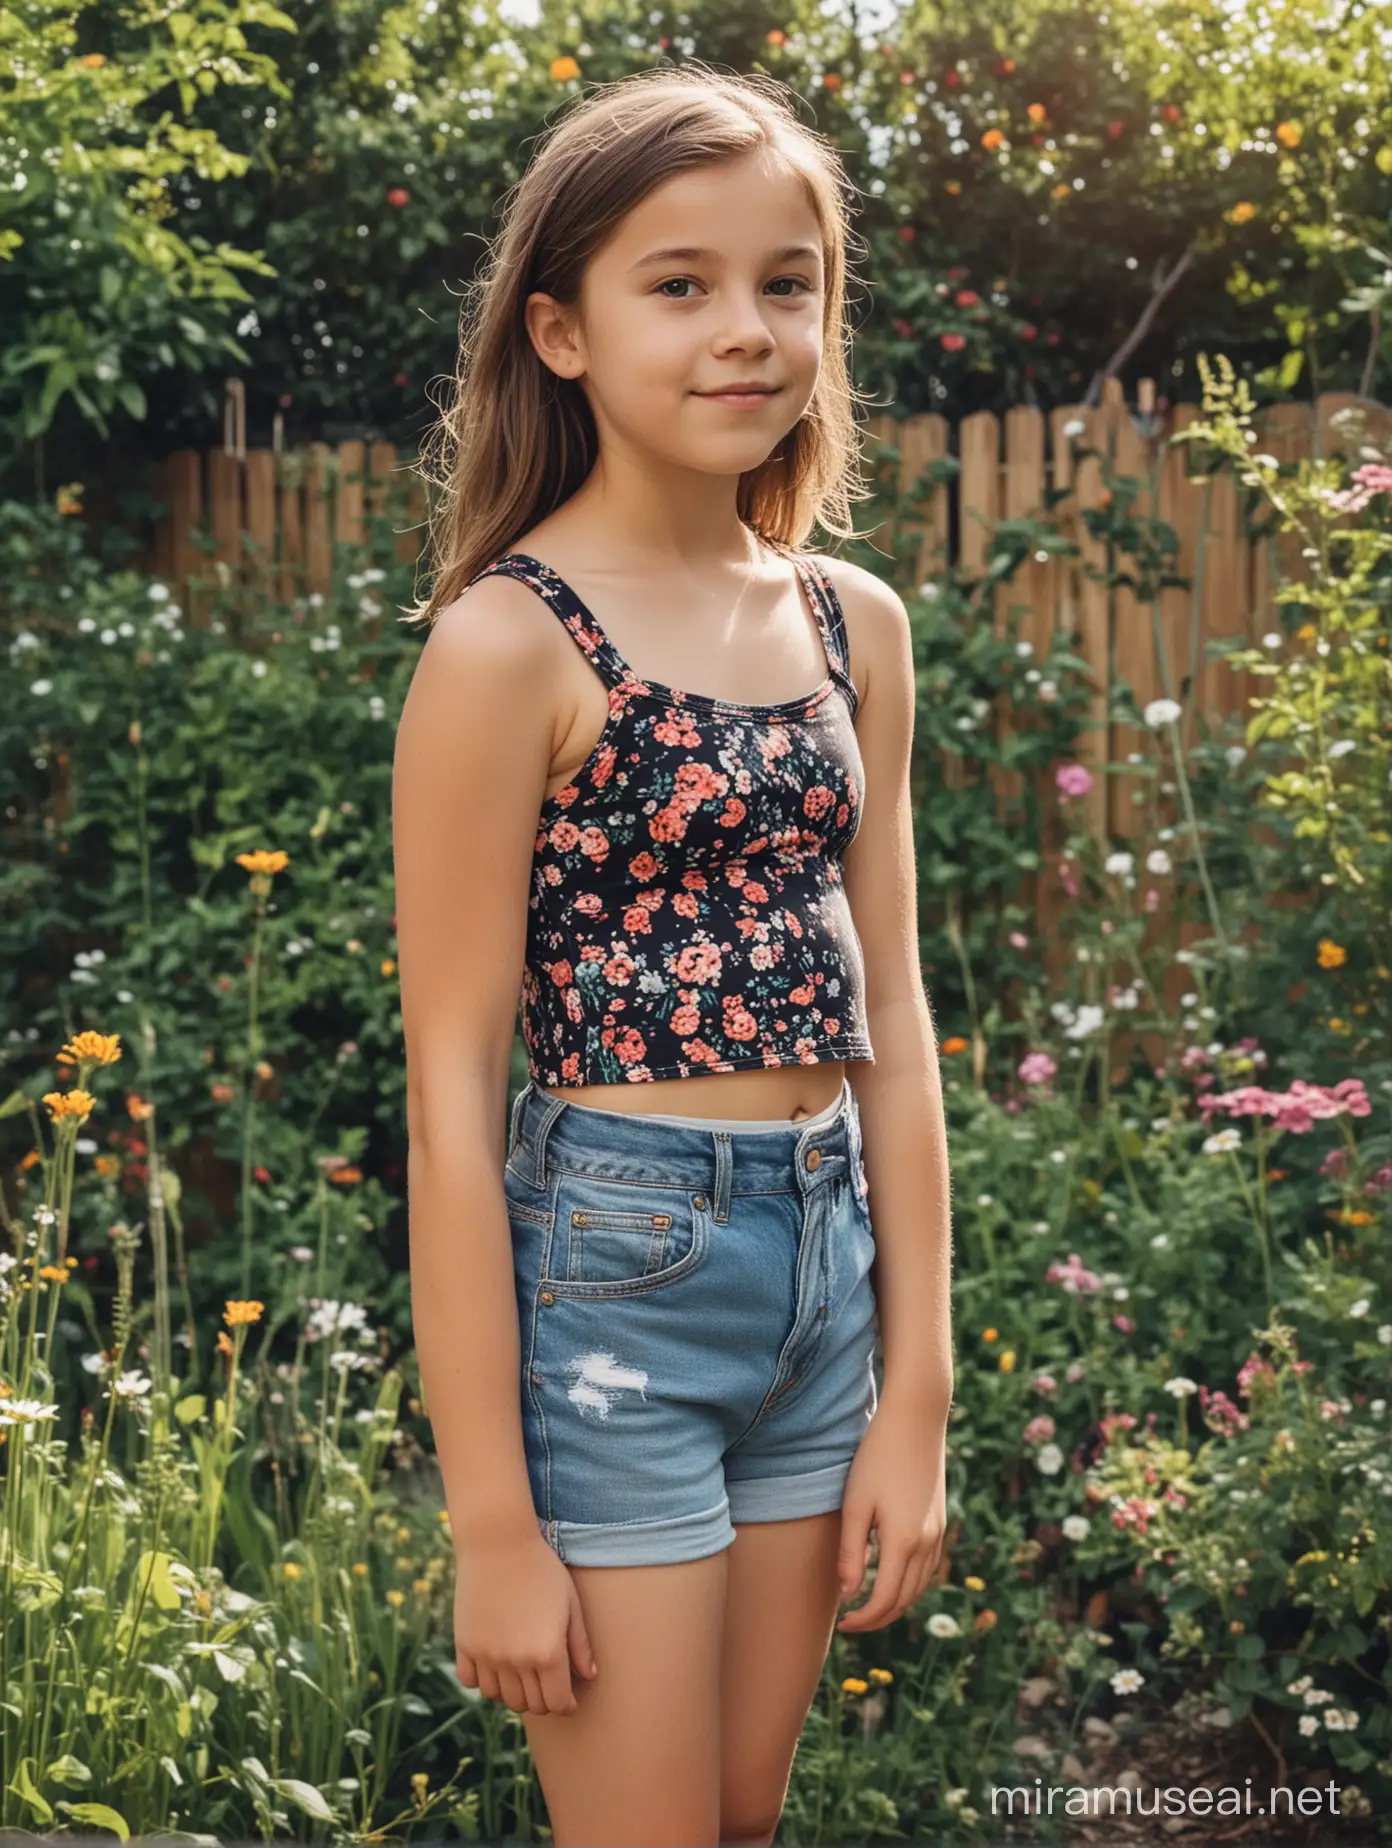 Young Girl in Cutout Tank Top and HighWaisted Shorts Enjoying Garden Outing